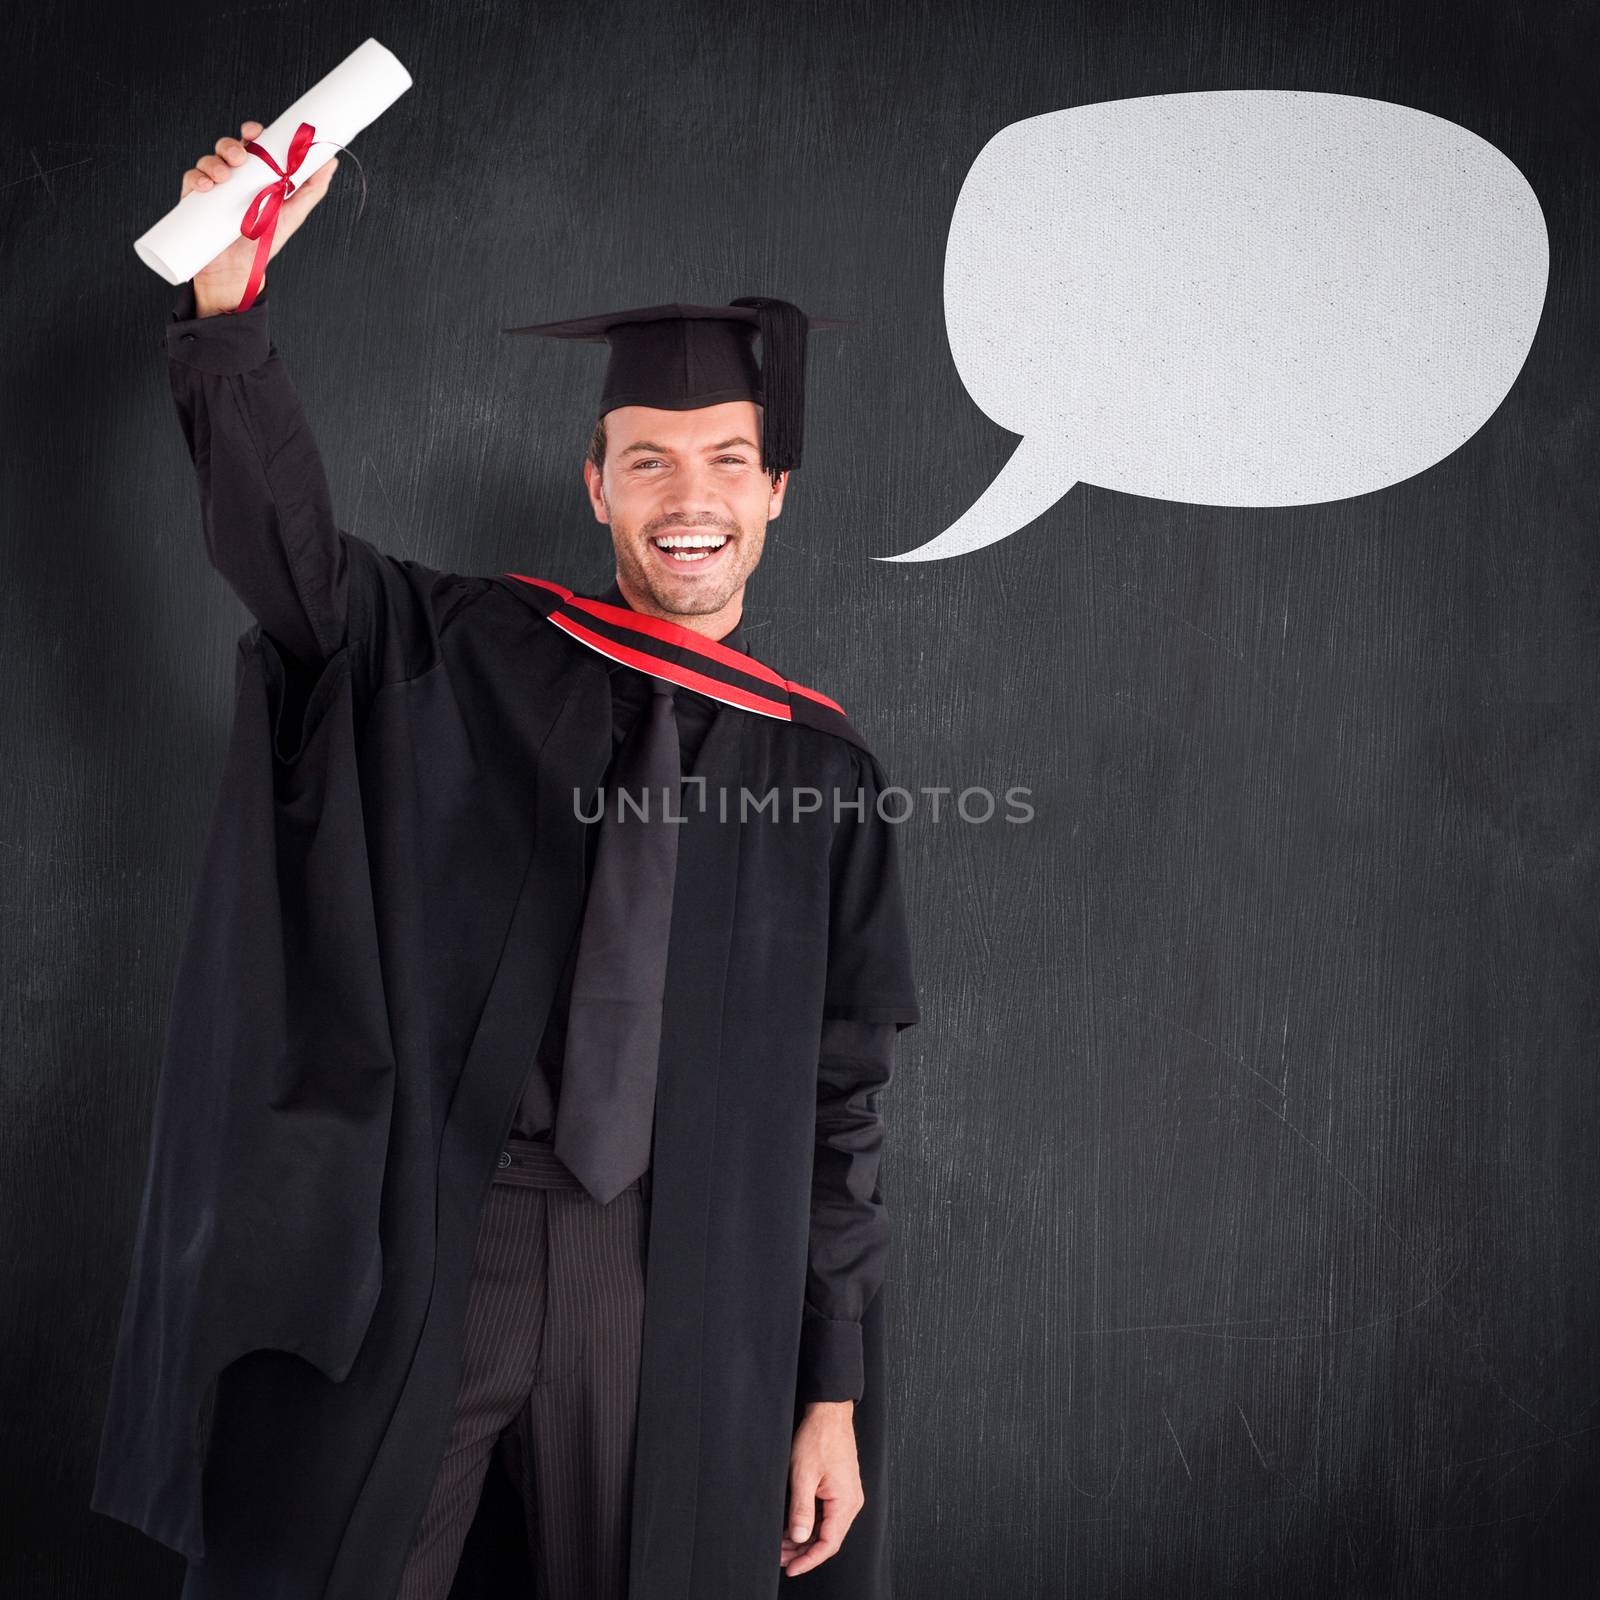 Smiling handsome boy showing his diploma to the camera  against blackboard